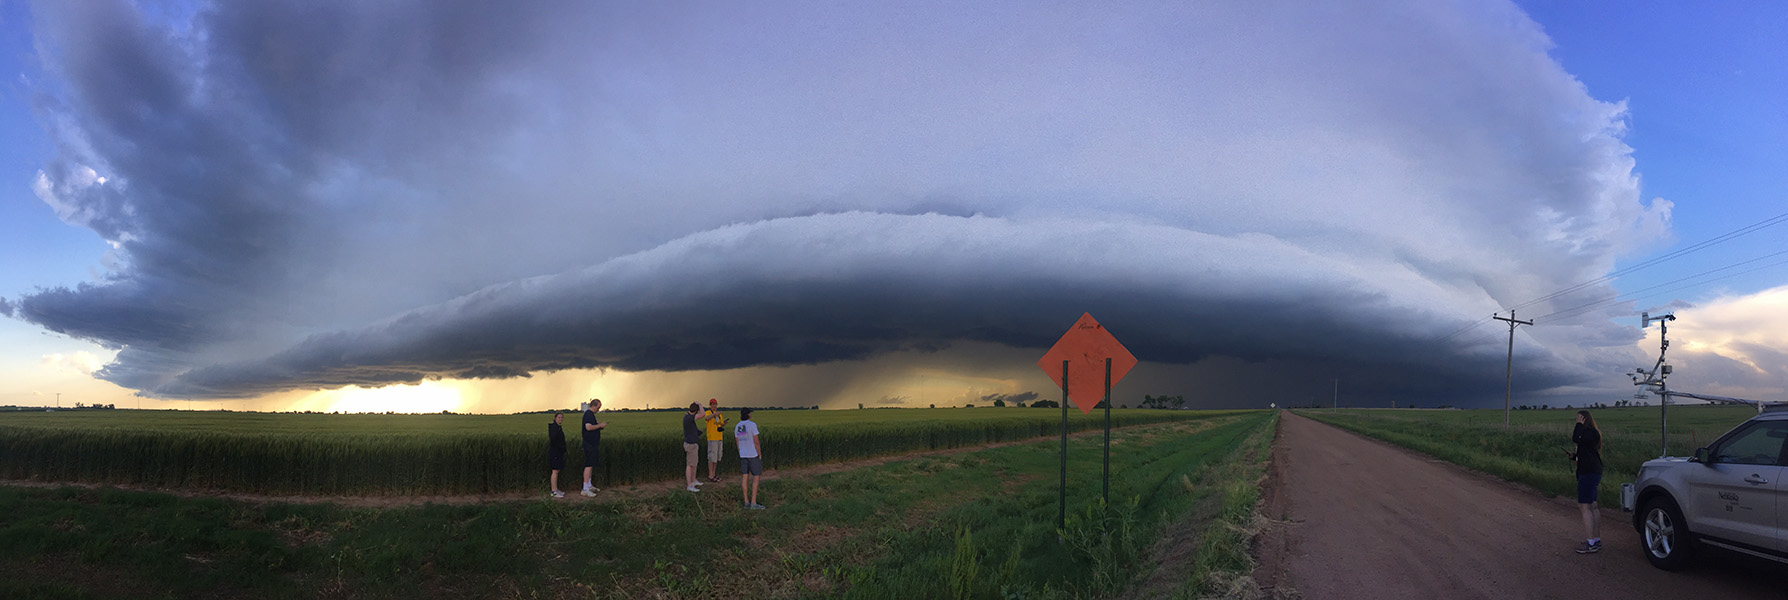 Five college students stand at a cornfield’s edge observing a giant low storm cloud.